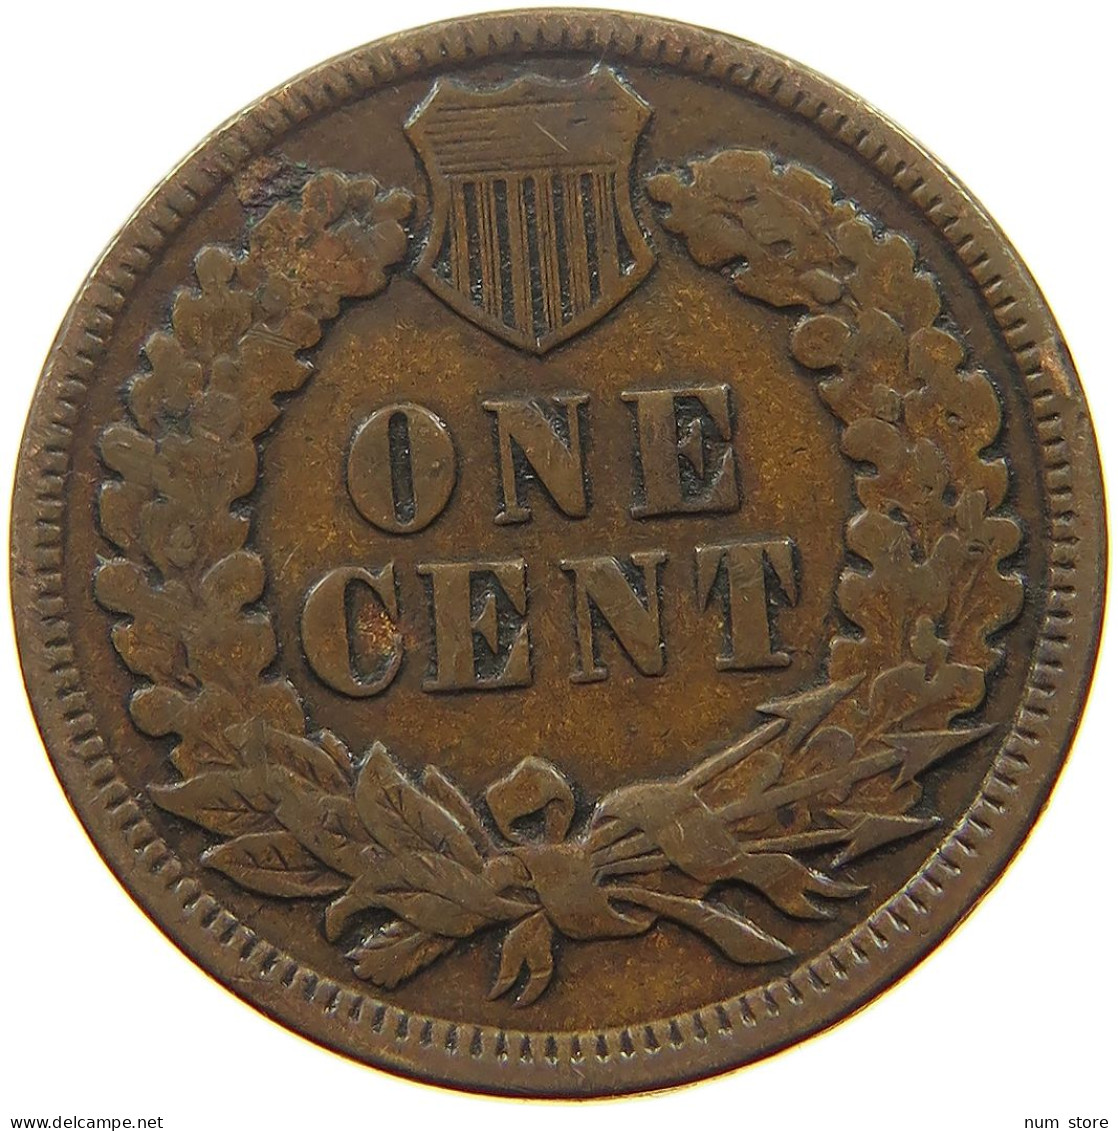 UNITED STATES OF AMERICA CENT 1897 INDIAN HEAD #s052 0117 - 1859-1909: Indian Head